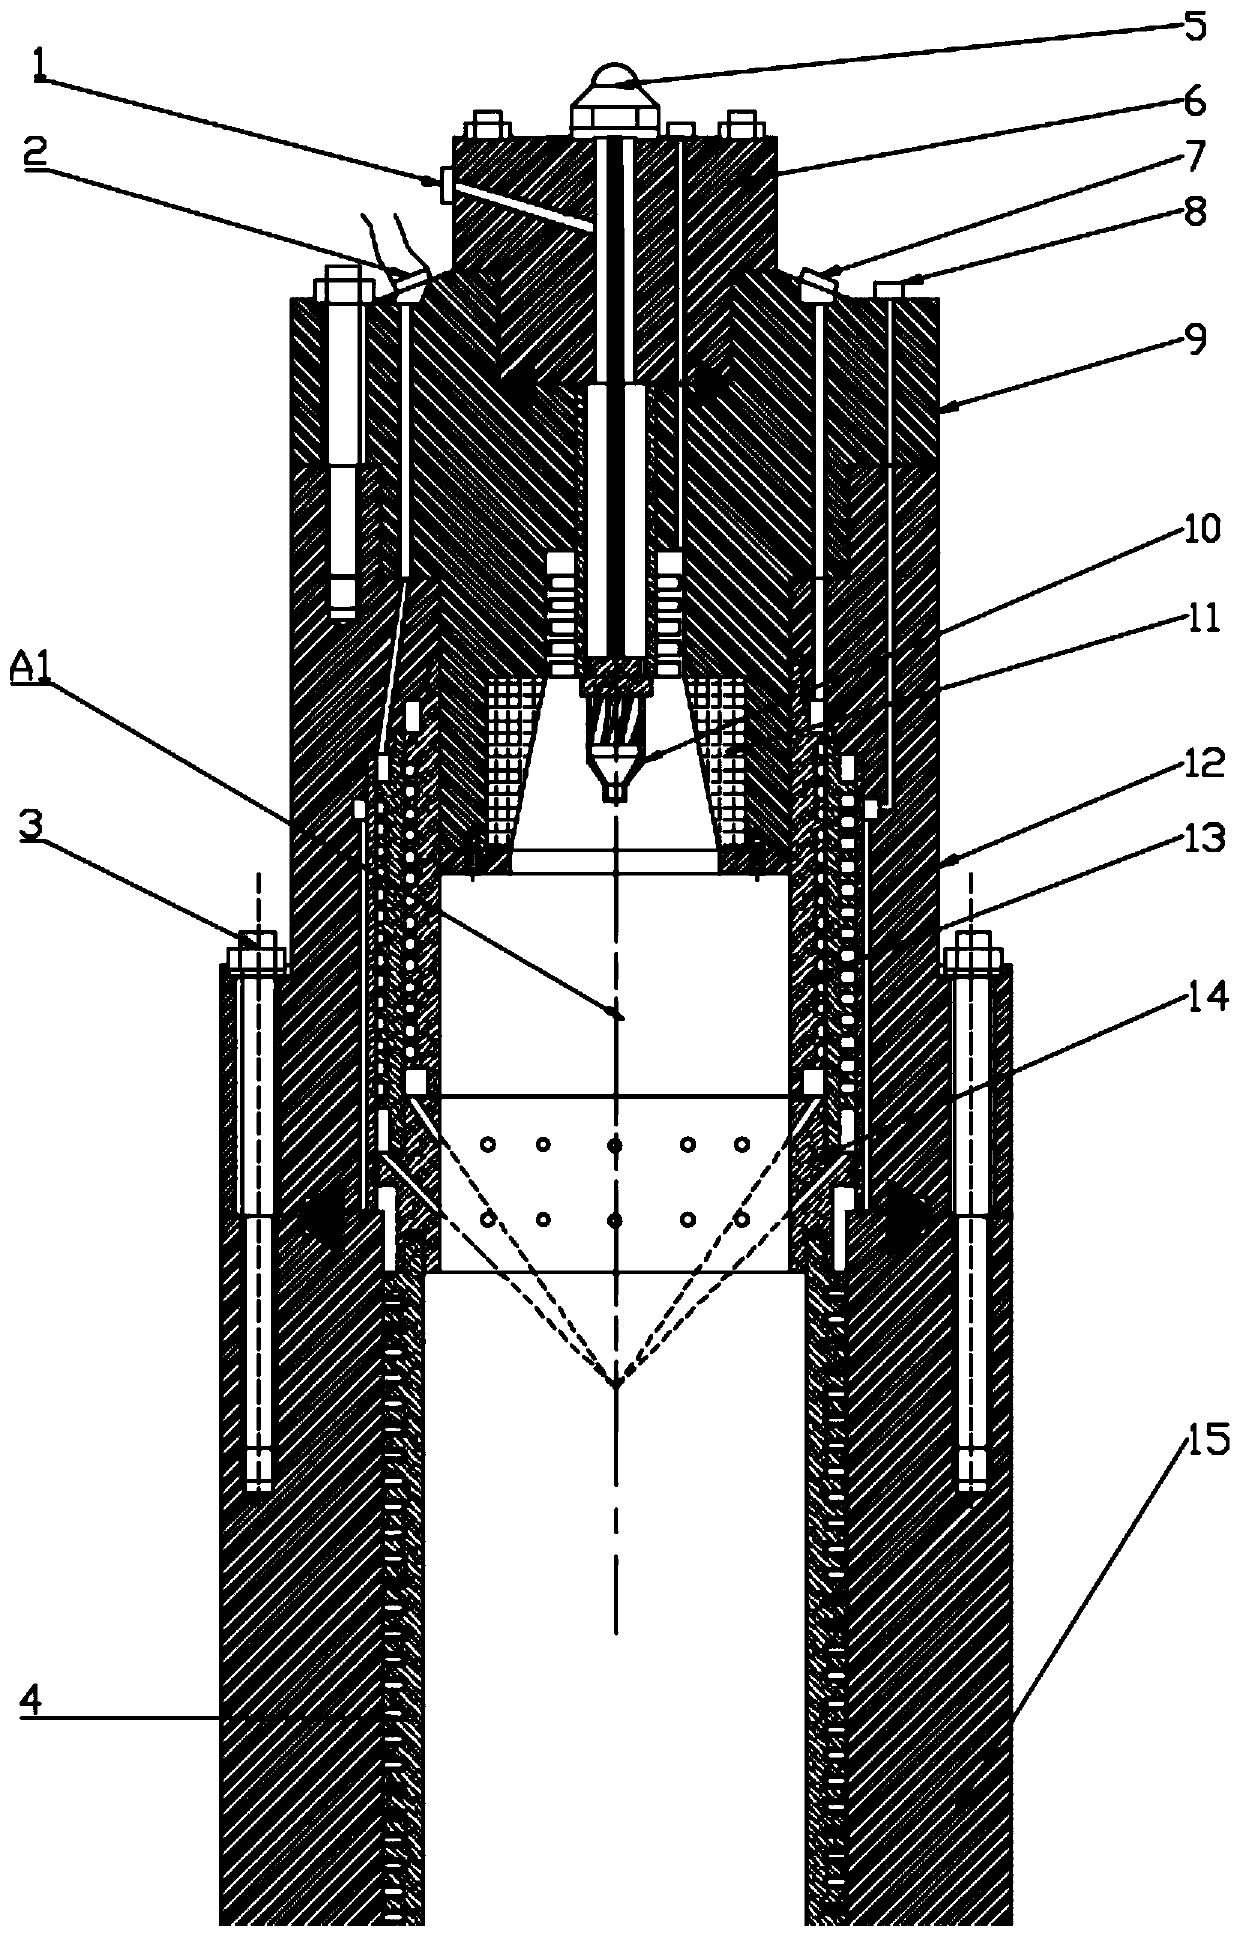 Supercritical hydrothermal combustion type downhole steam generator for heavy oil thermal recovery